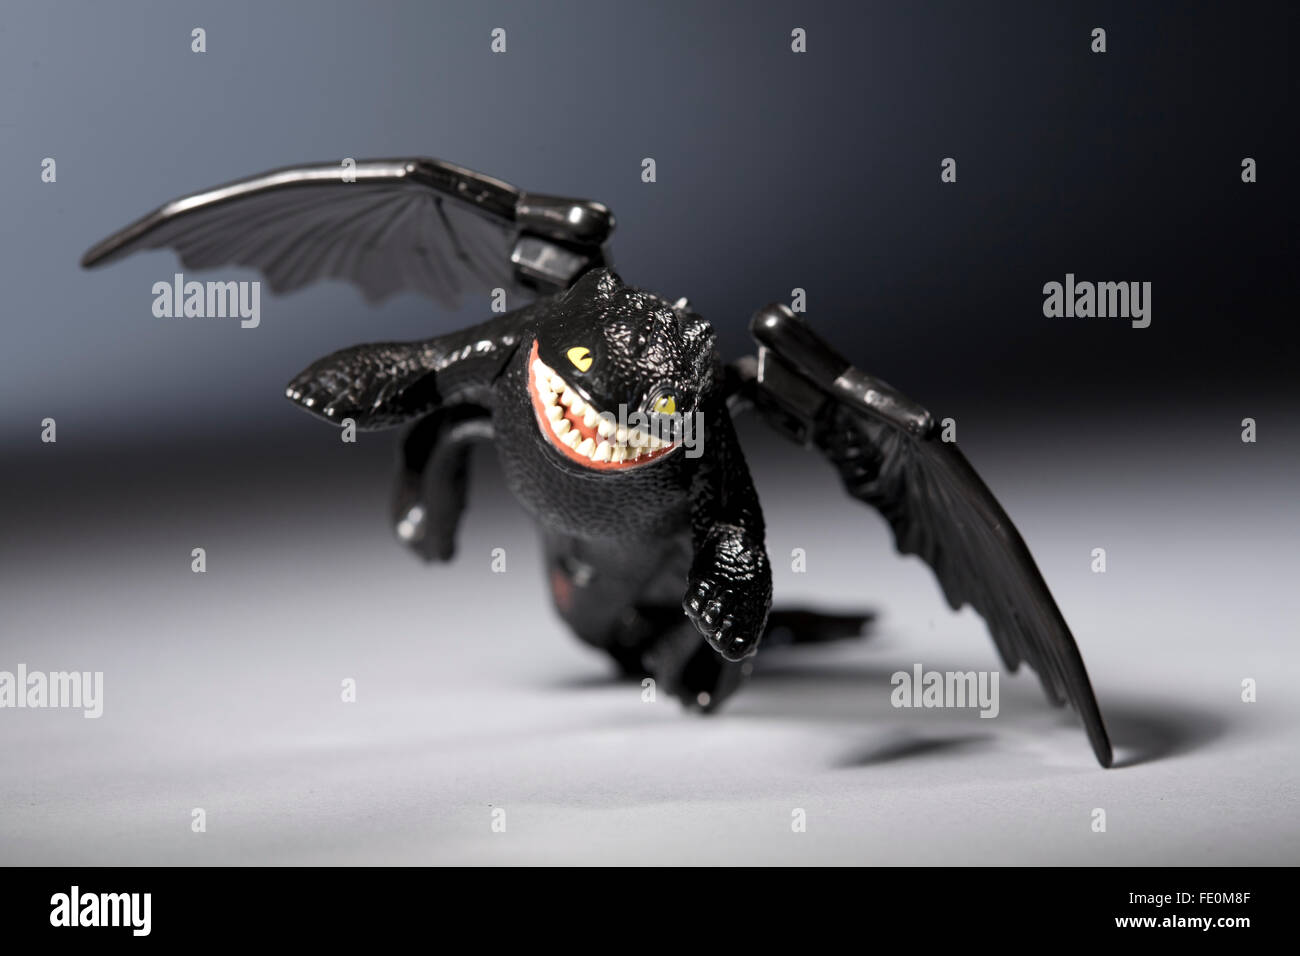 'night fury' mcdonalds happy meal toy from how to tame your dragon Stock Photo